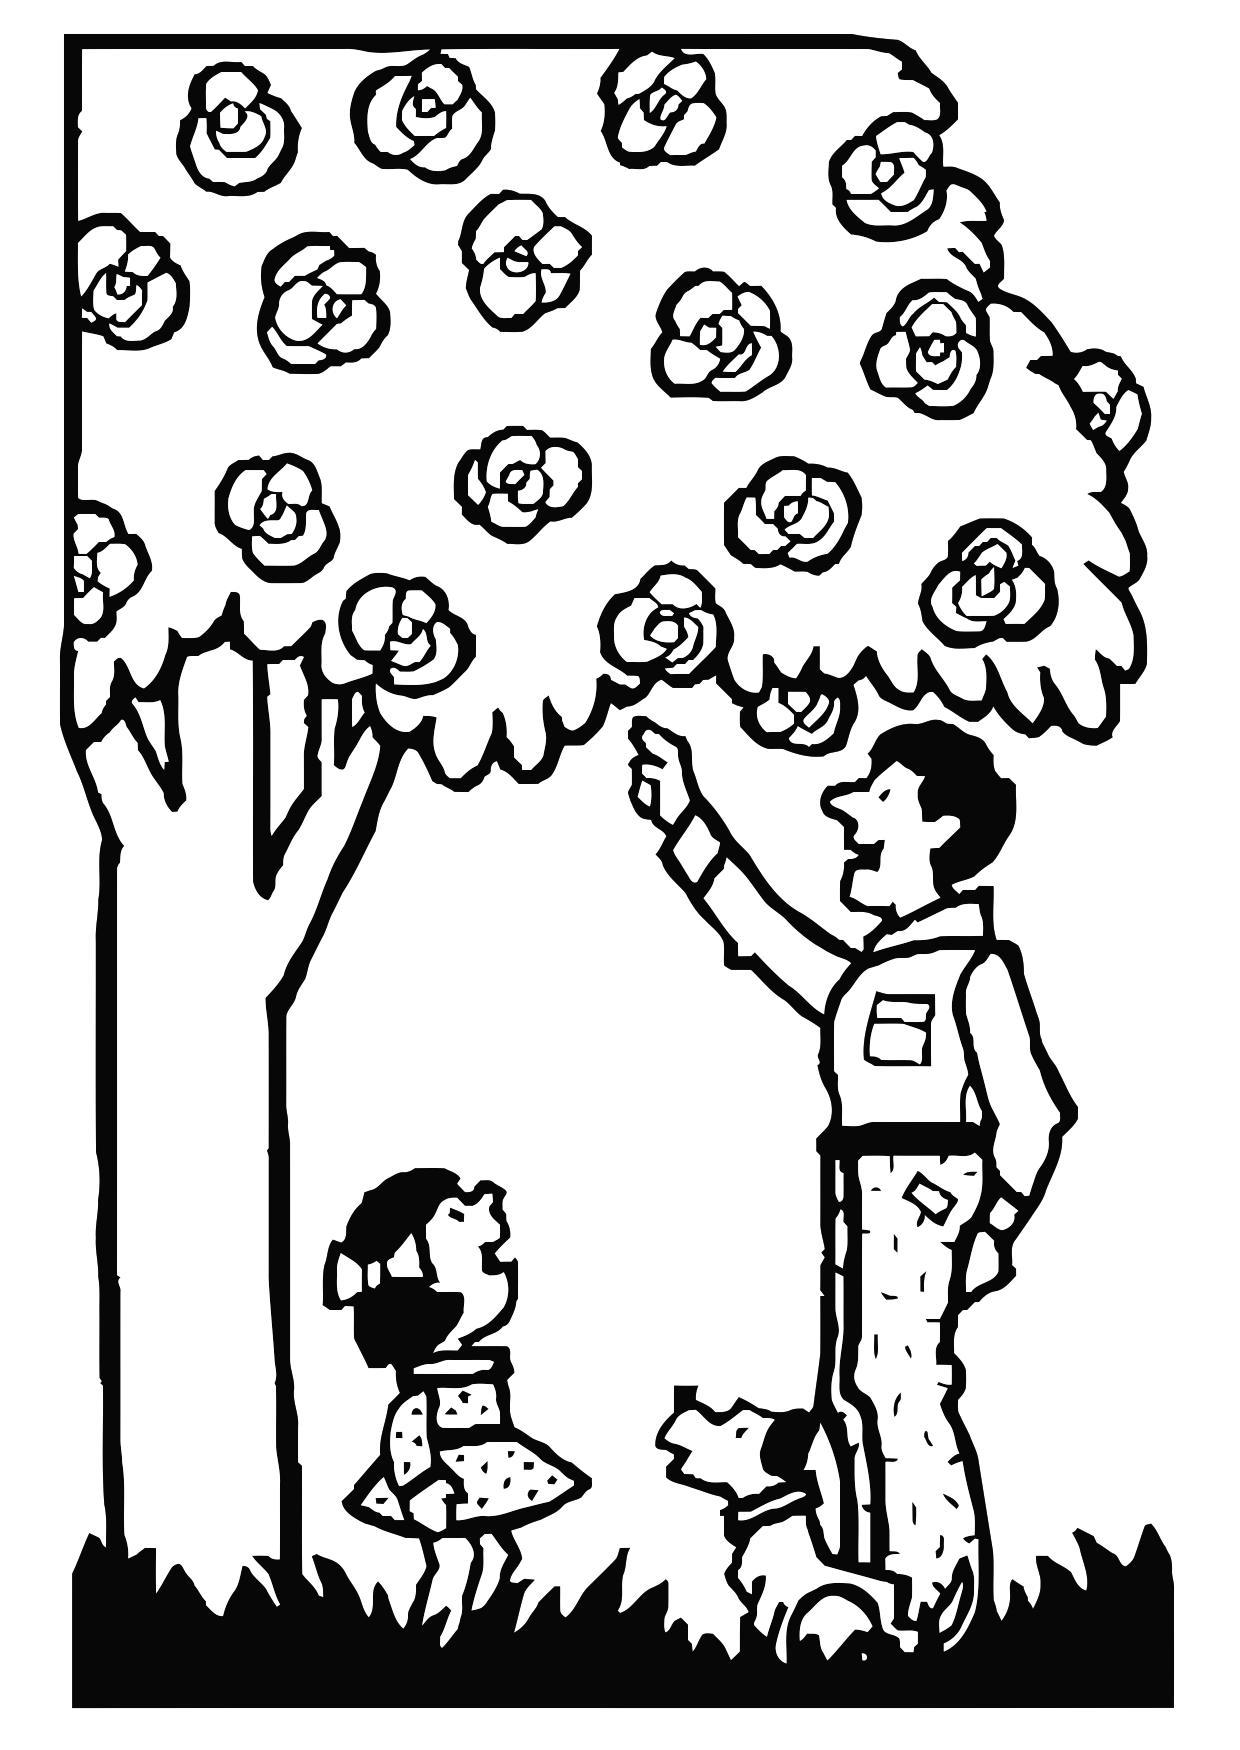 Coloring page father and daughter